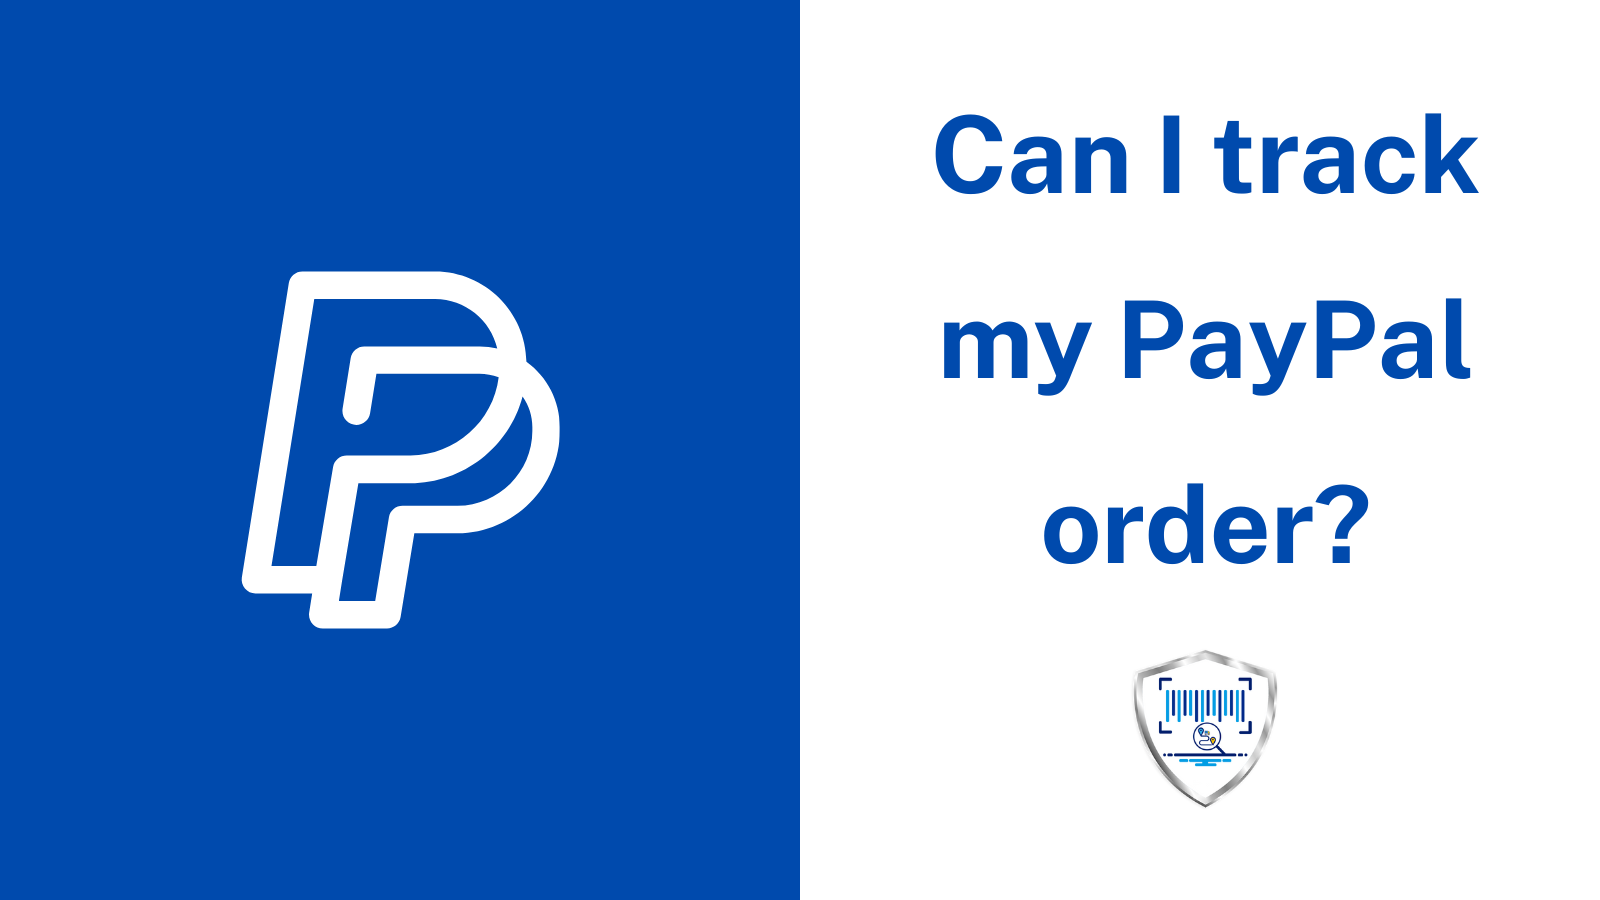 Synctrack helps to track your PayPal orders carefully